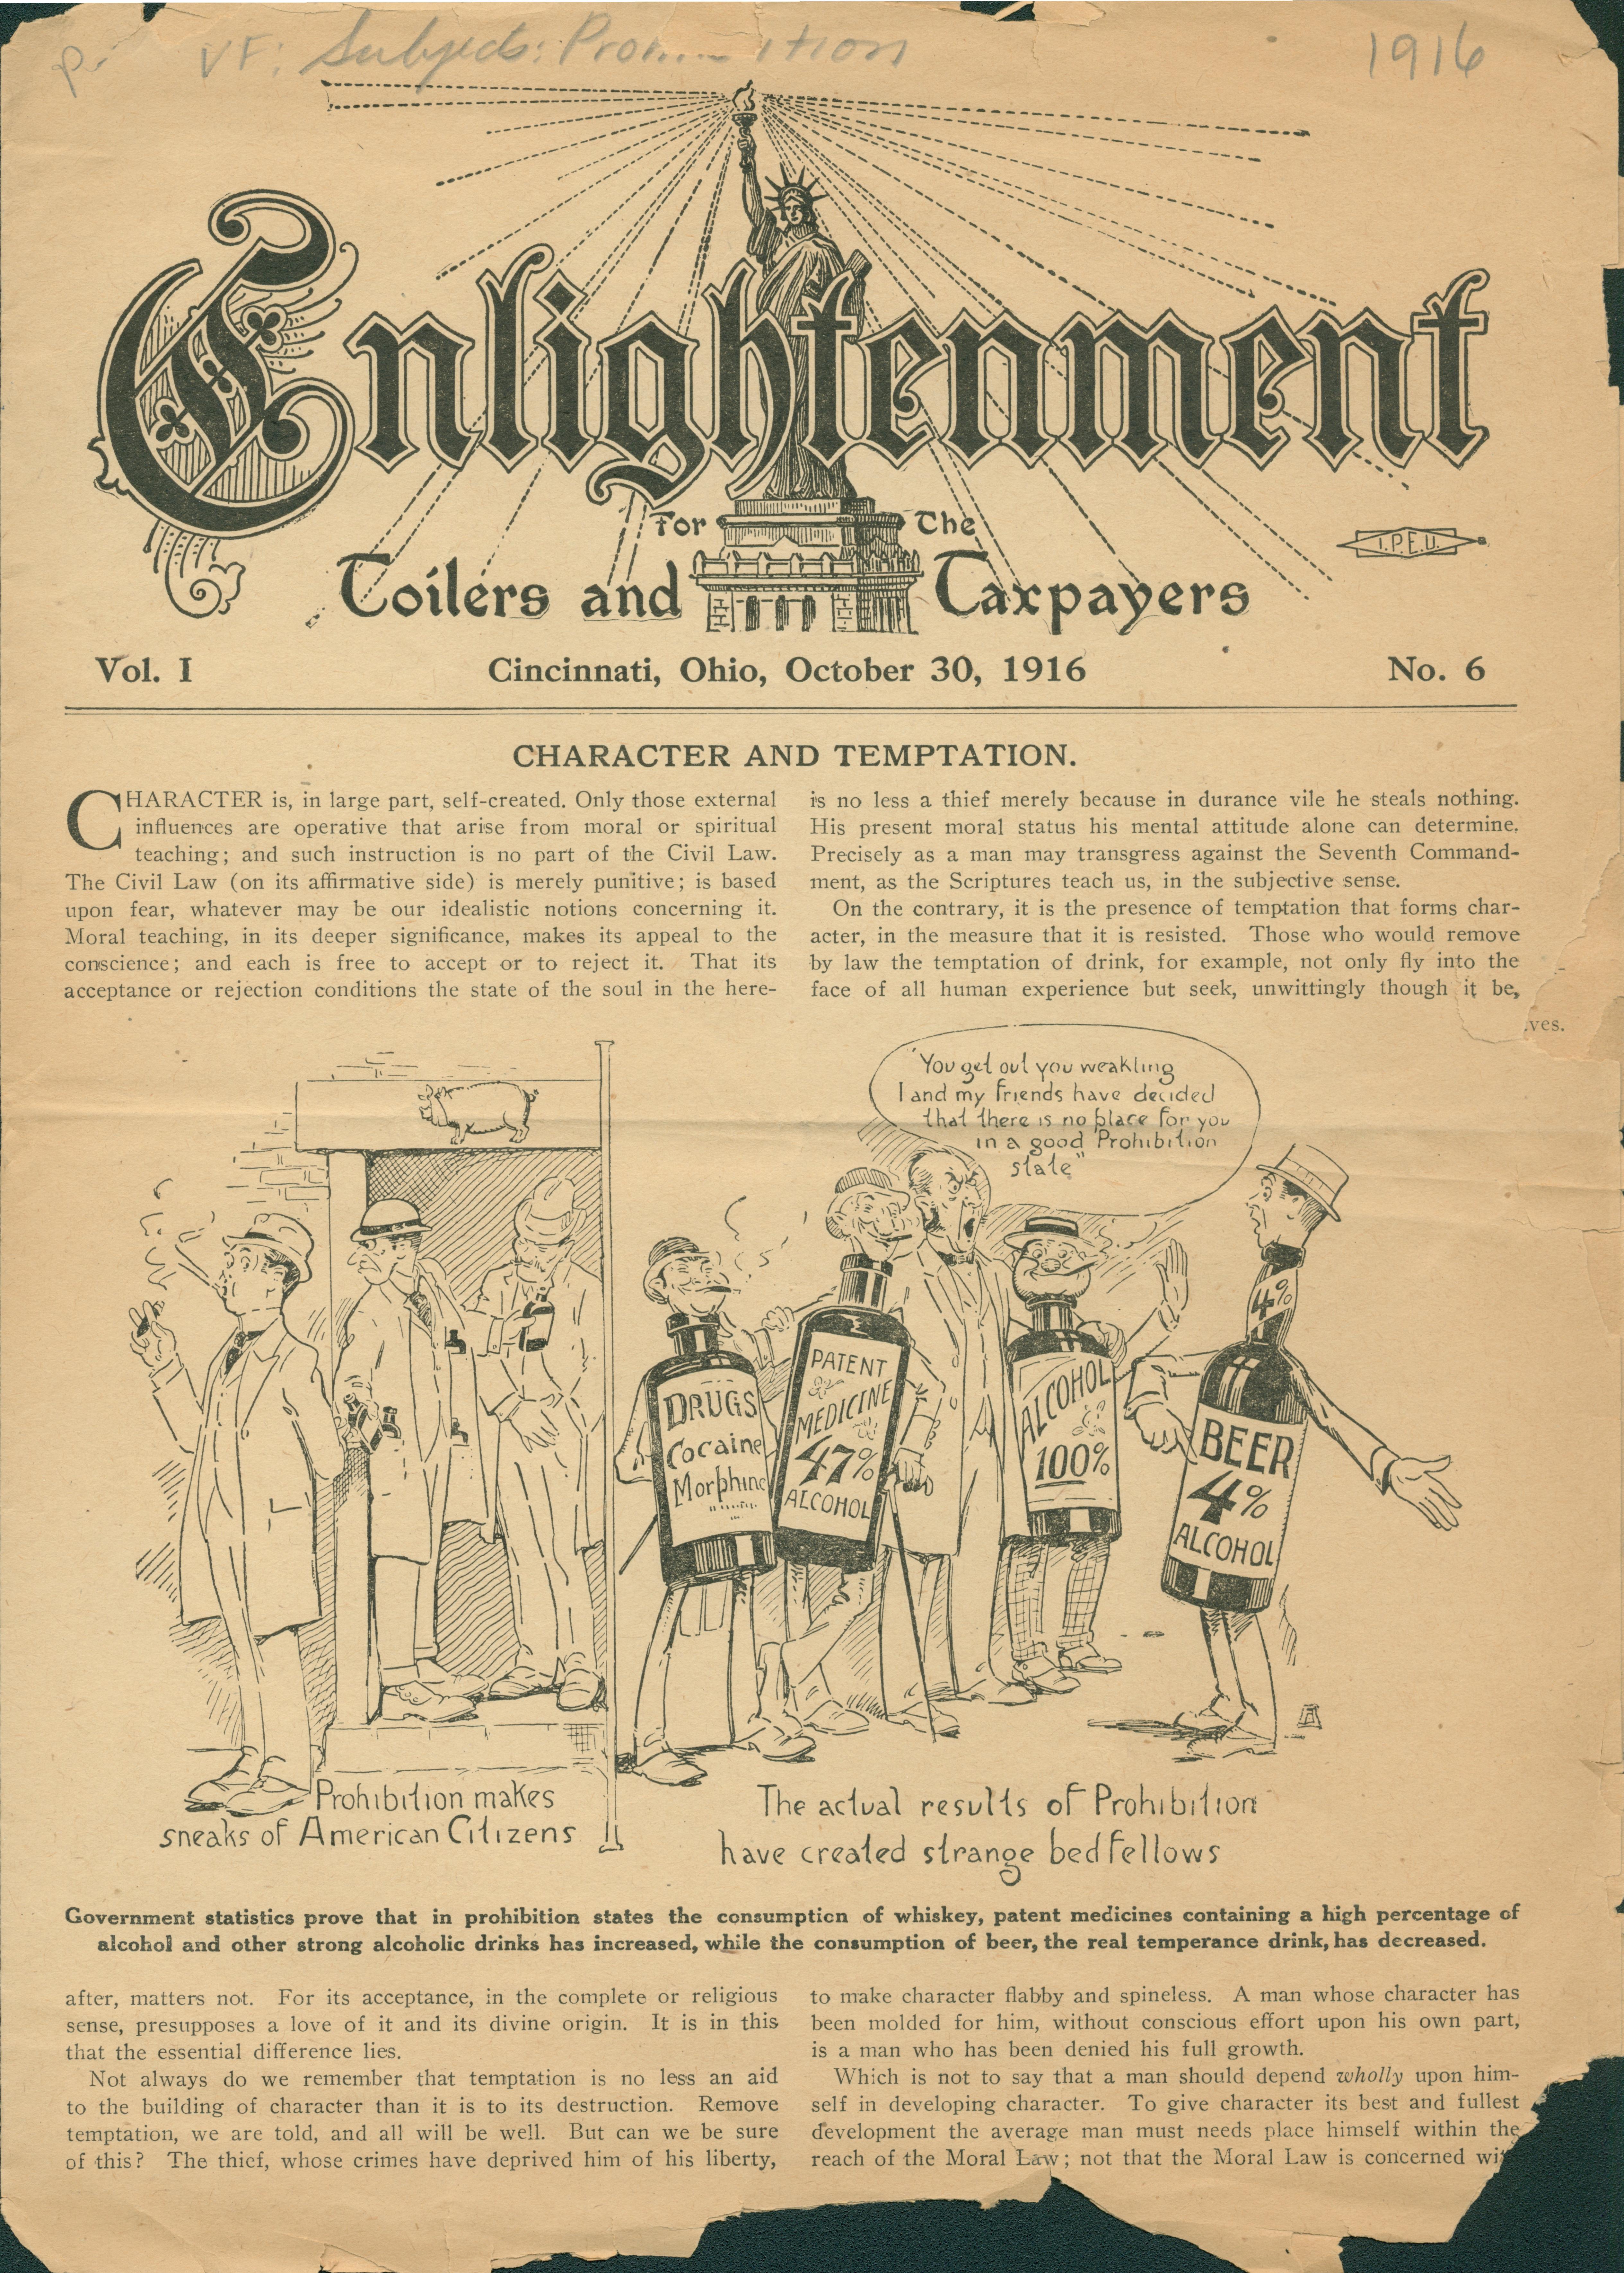 The front page of this publication shows the title, an article of character as it related to prohibition and two cartoons arguing against prohibition